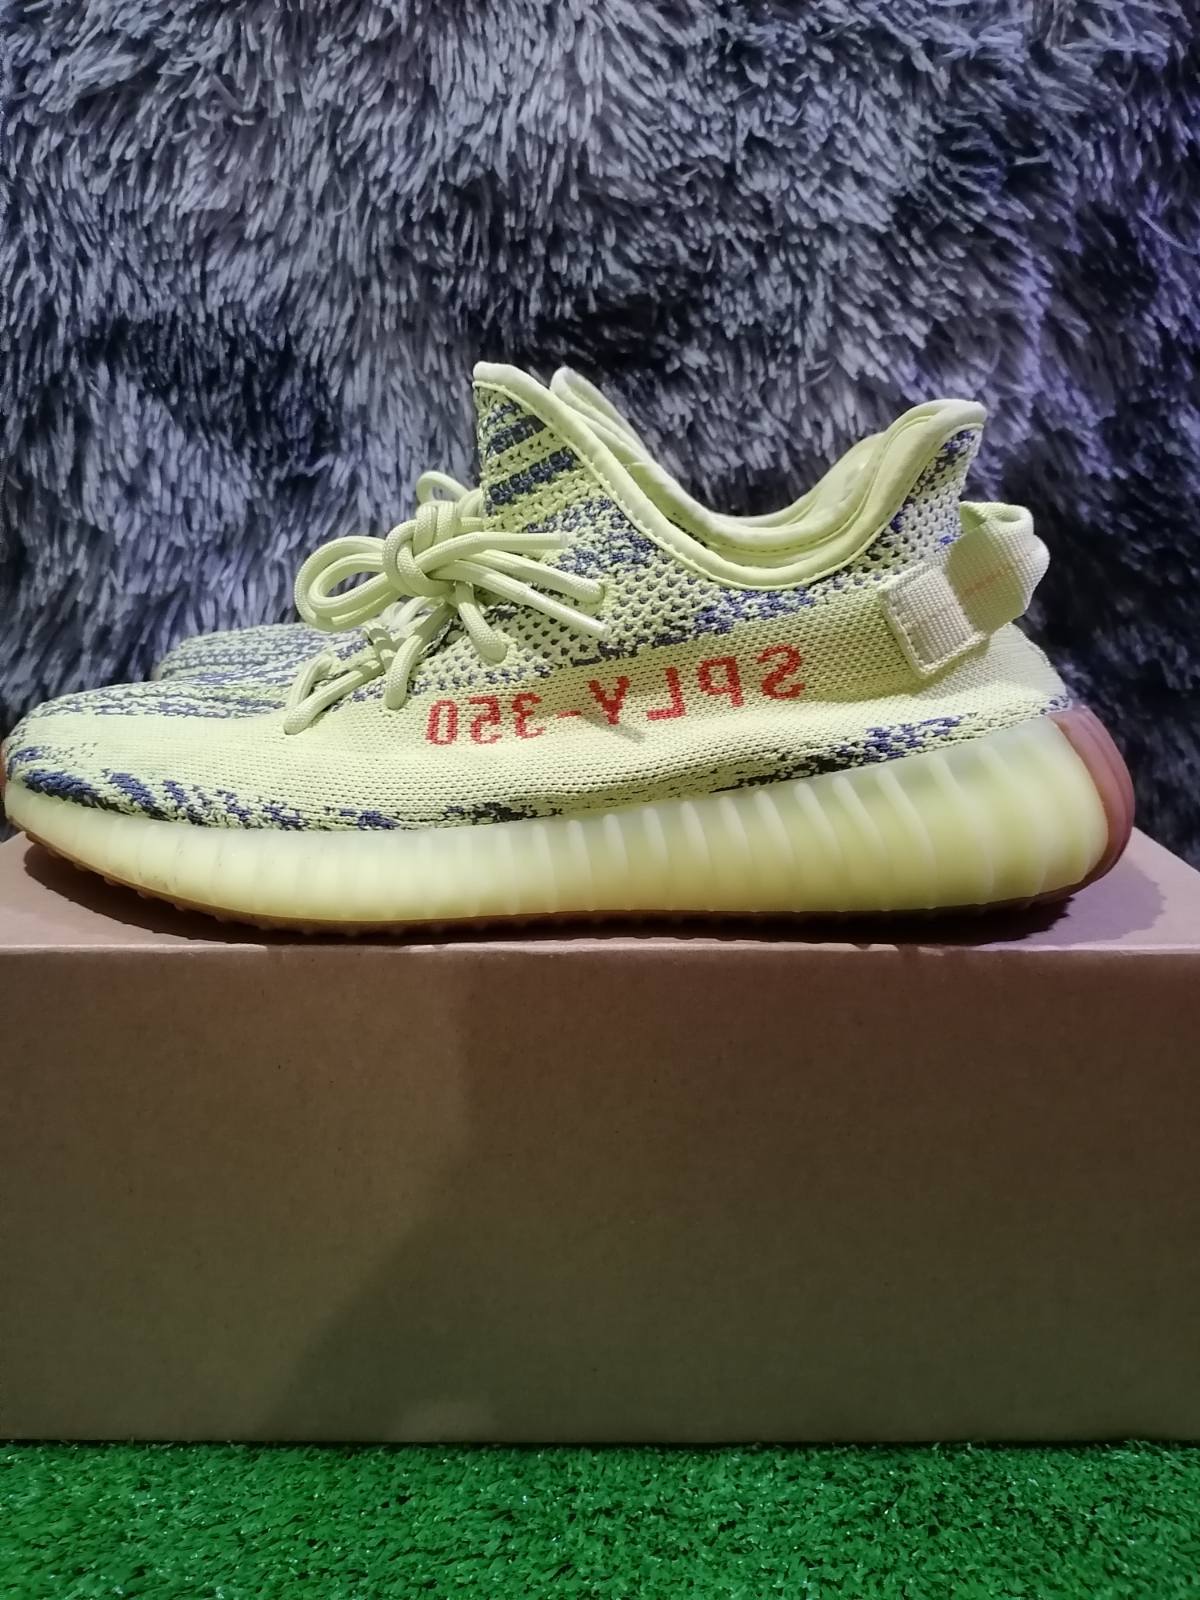 Pre-owned) Adidas YEEZY Boost 350 V2 "Semi Frozen Yellow" (B37572